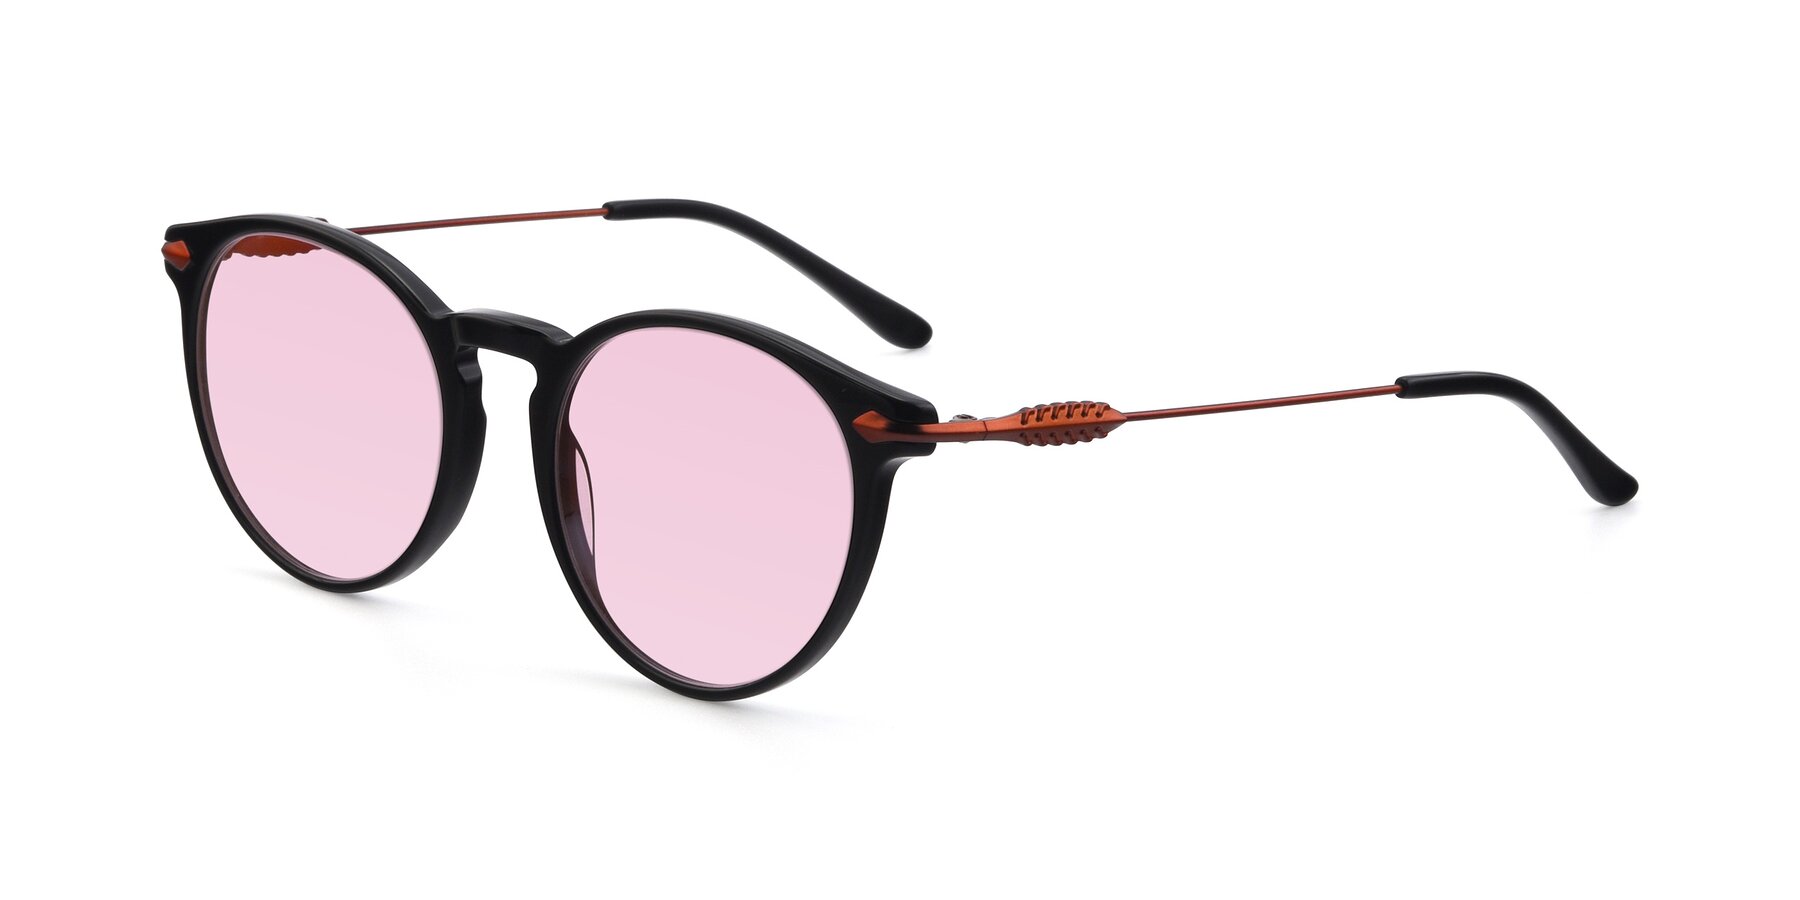 Angle of 17660 in Black with Light Pink Tinted Lenses